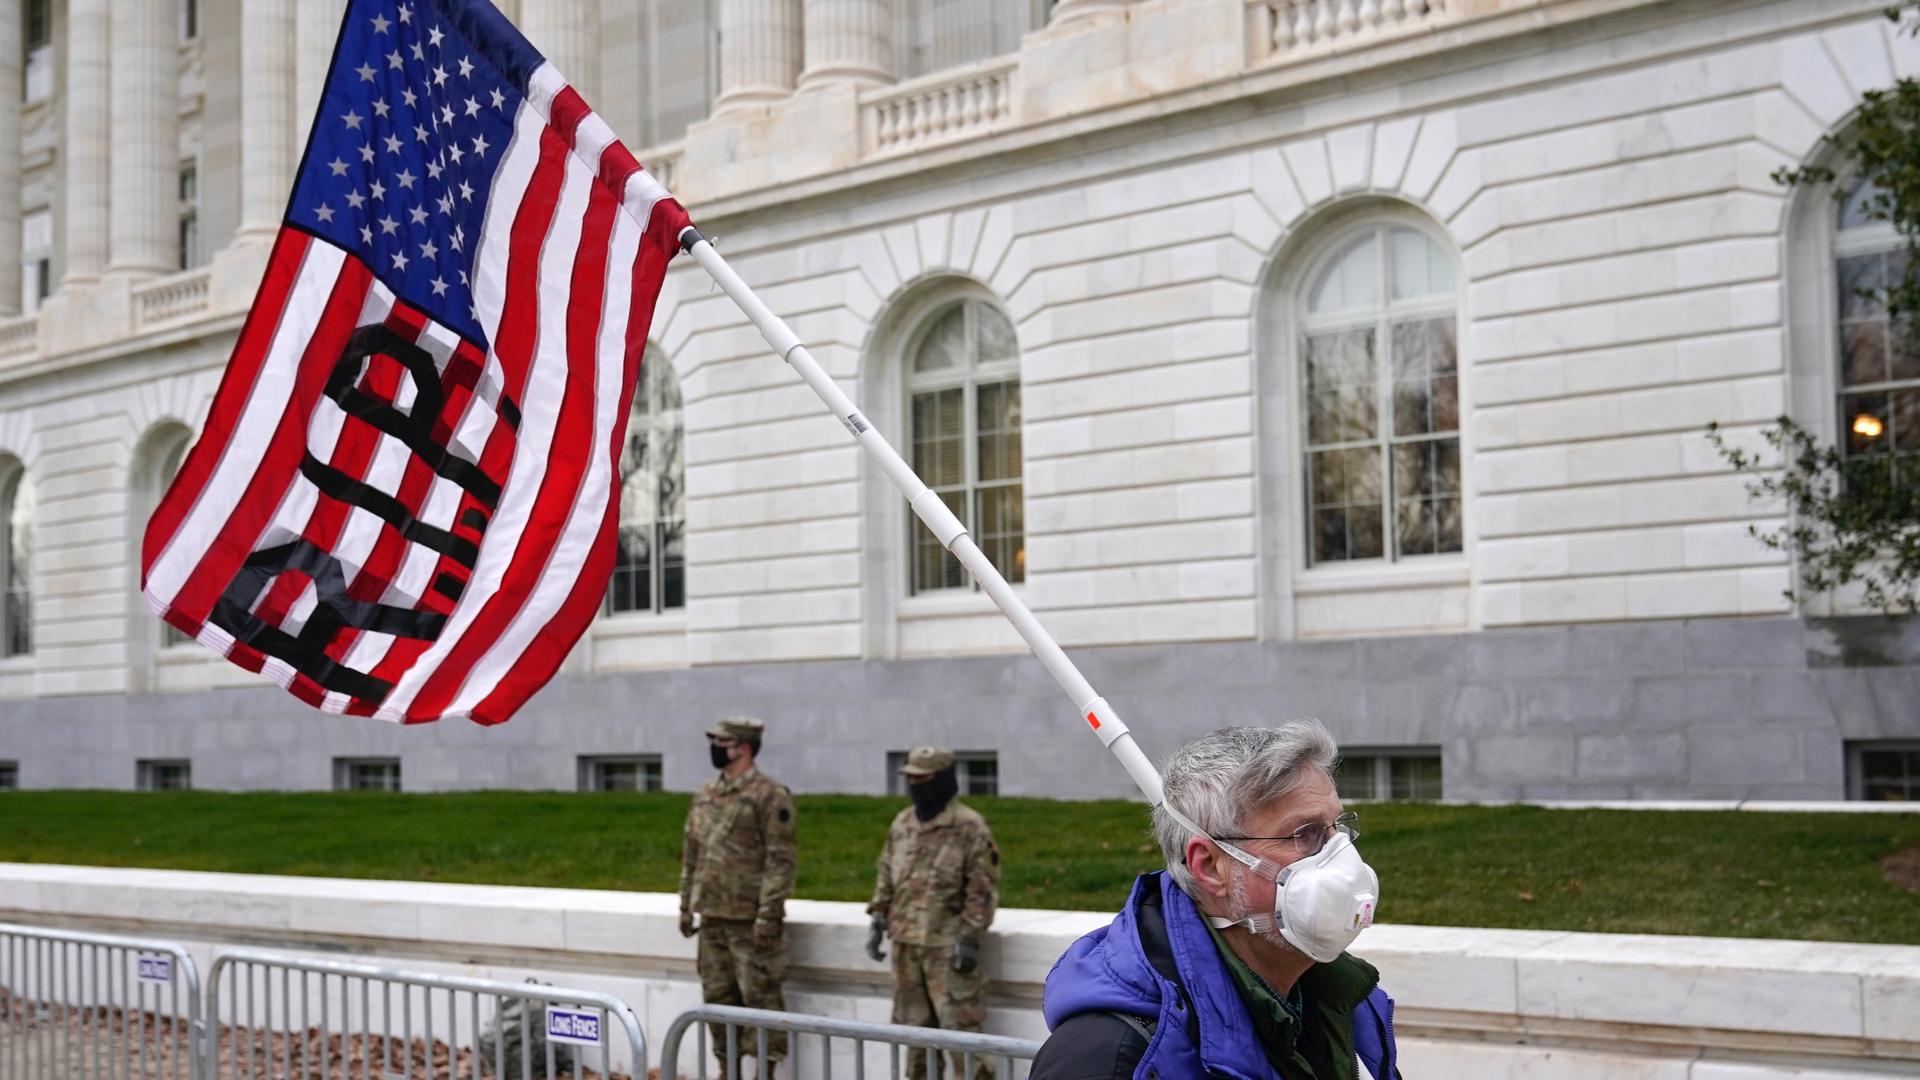 A protester walks past the Russell Senate Office Building on Capitol Hill in Washington, Friday, Jan. 8, 2021.